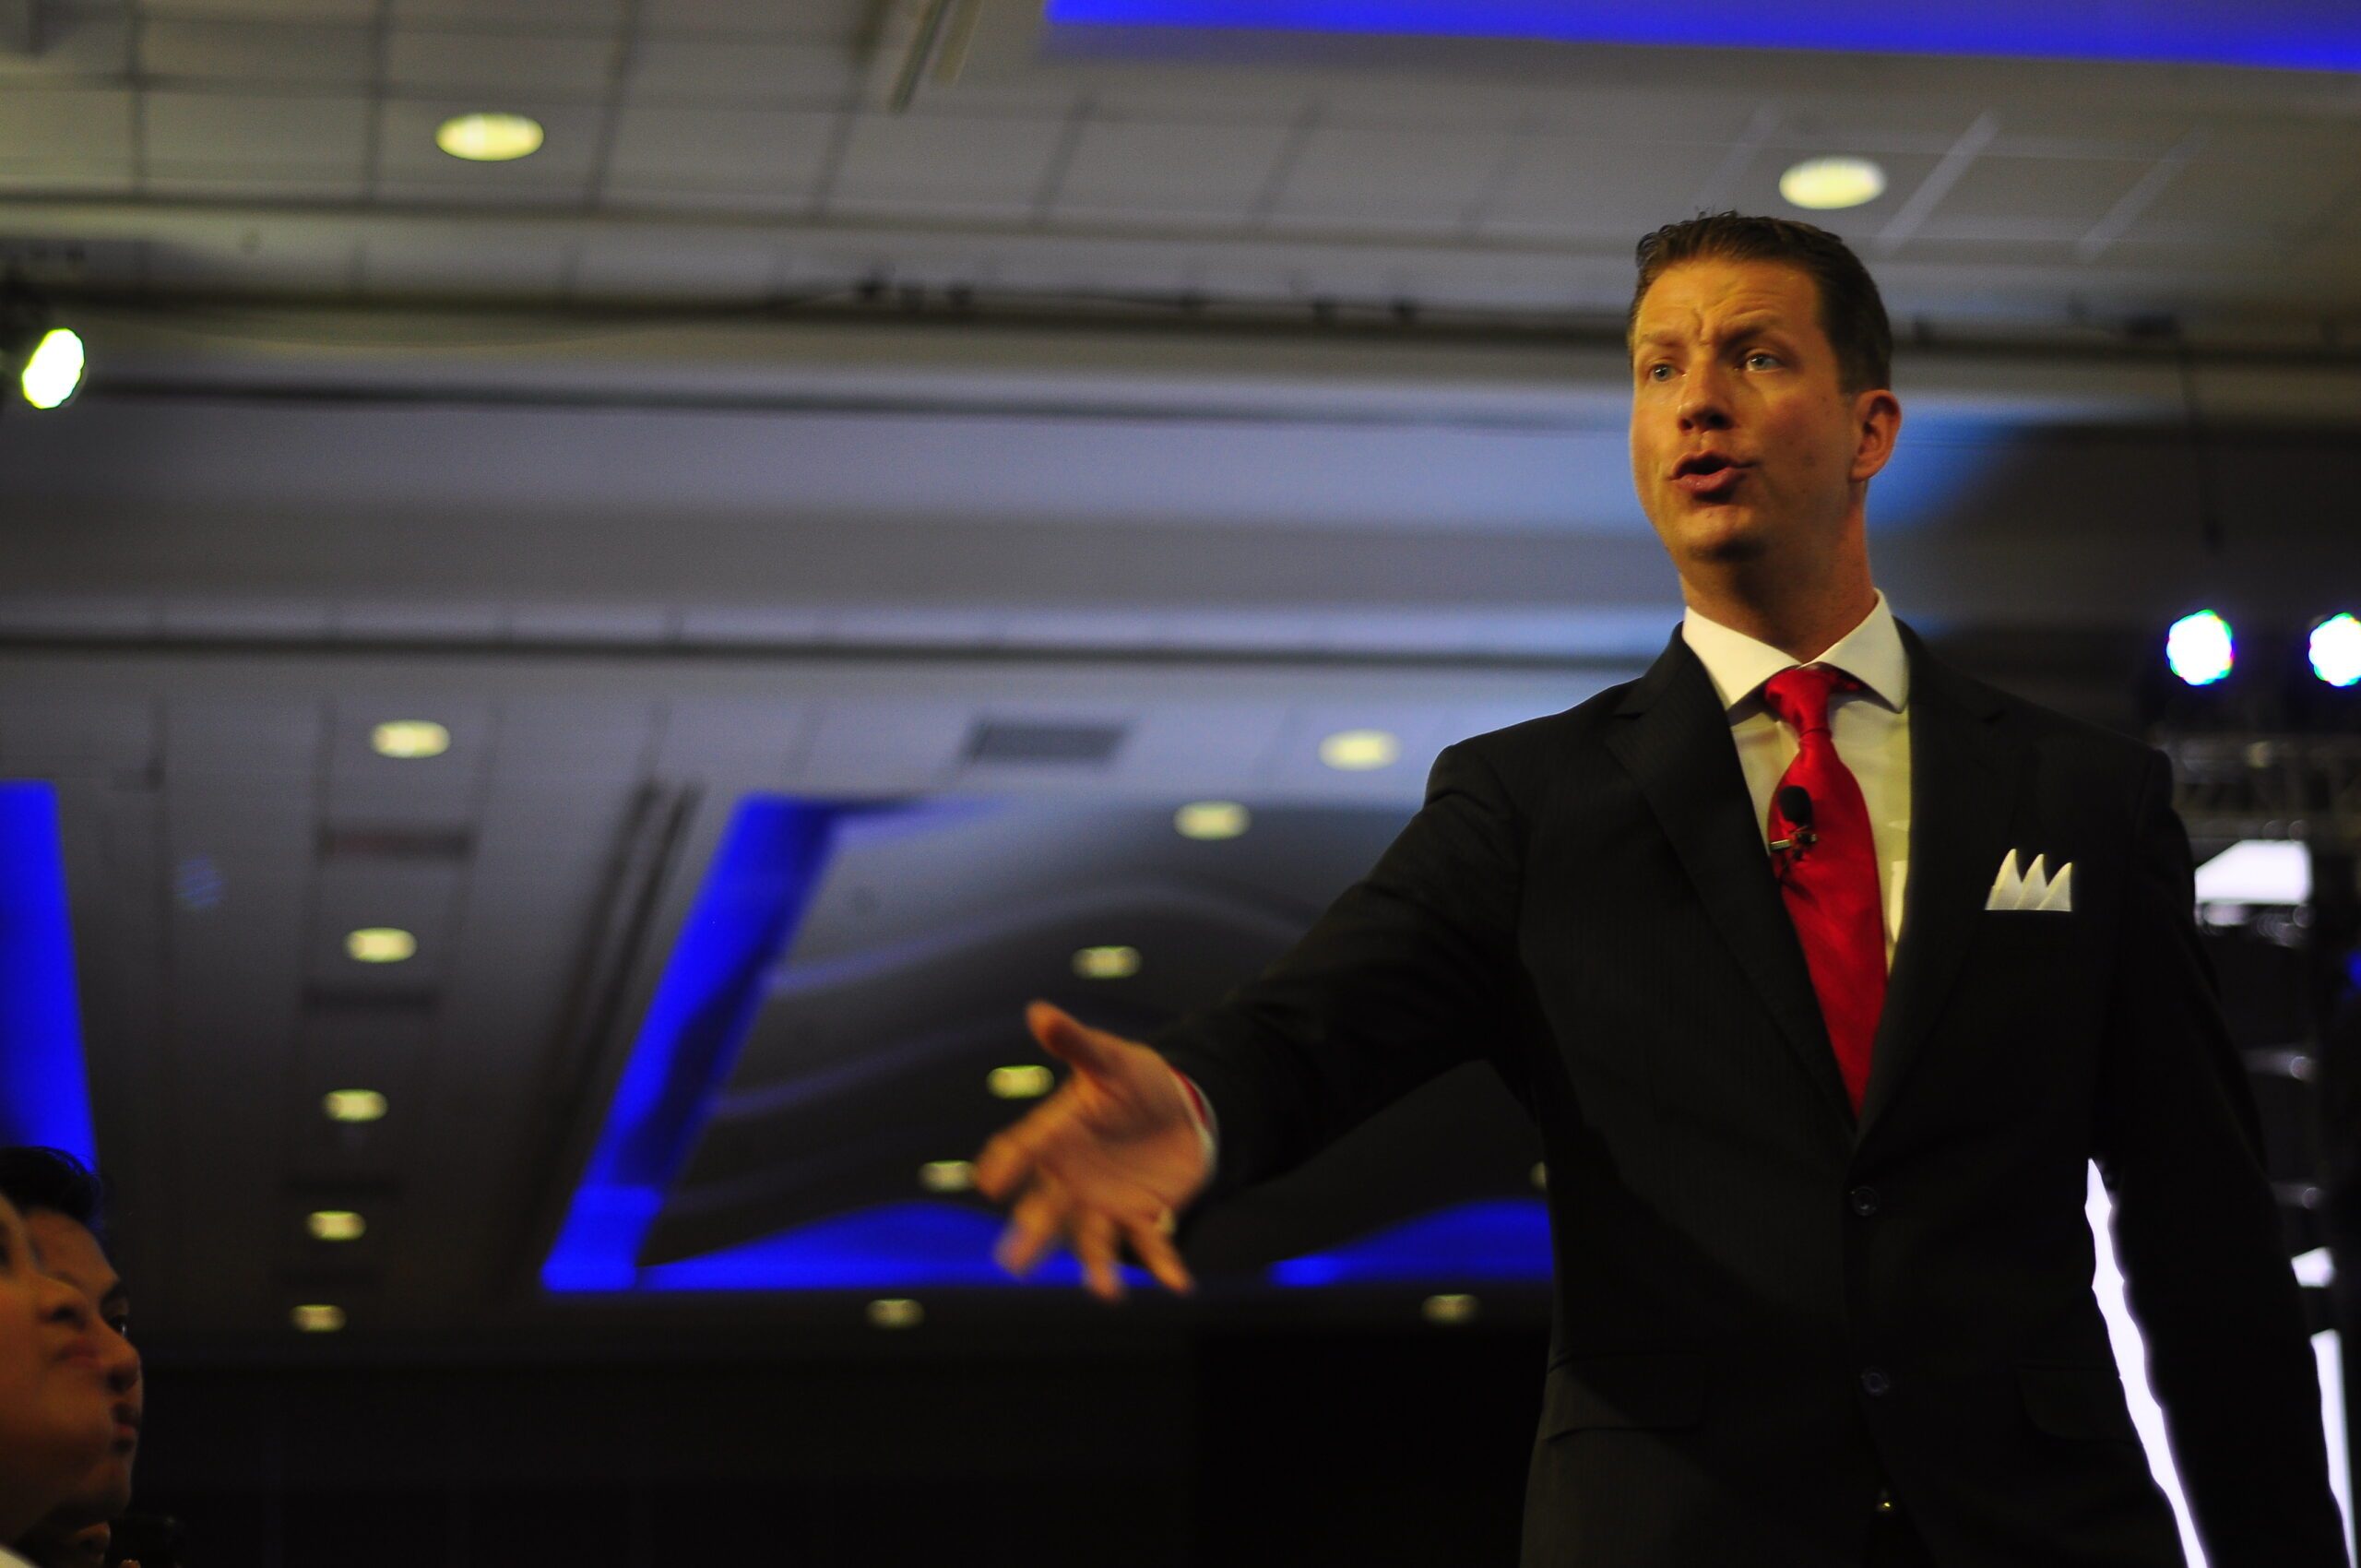 JT Foxx: I’ll make you the ‘Manny Pacquiao of business’